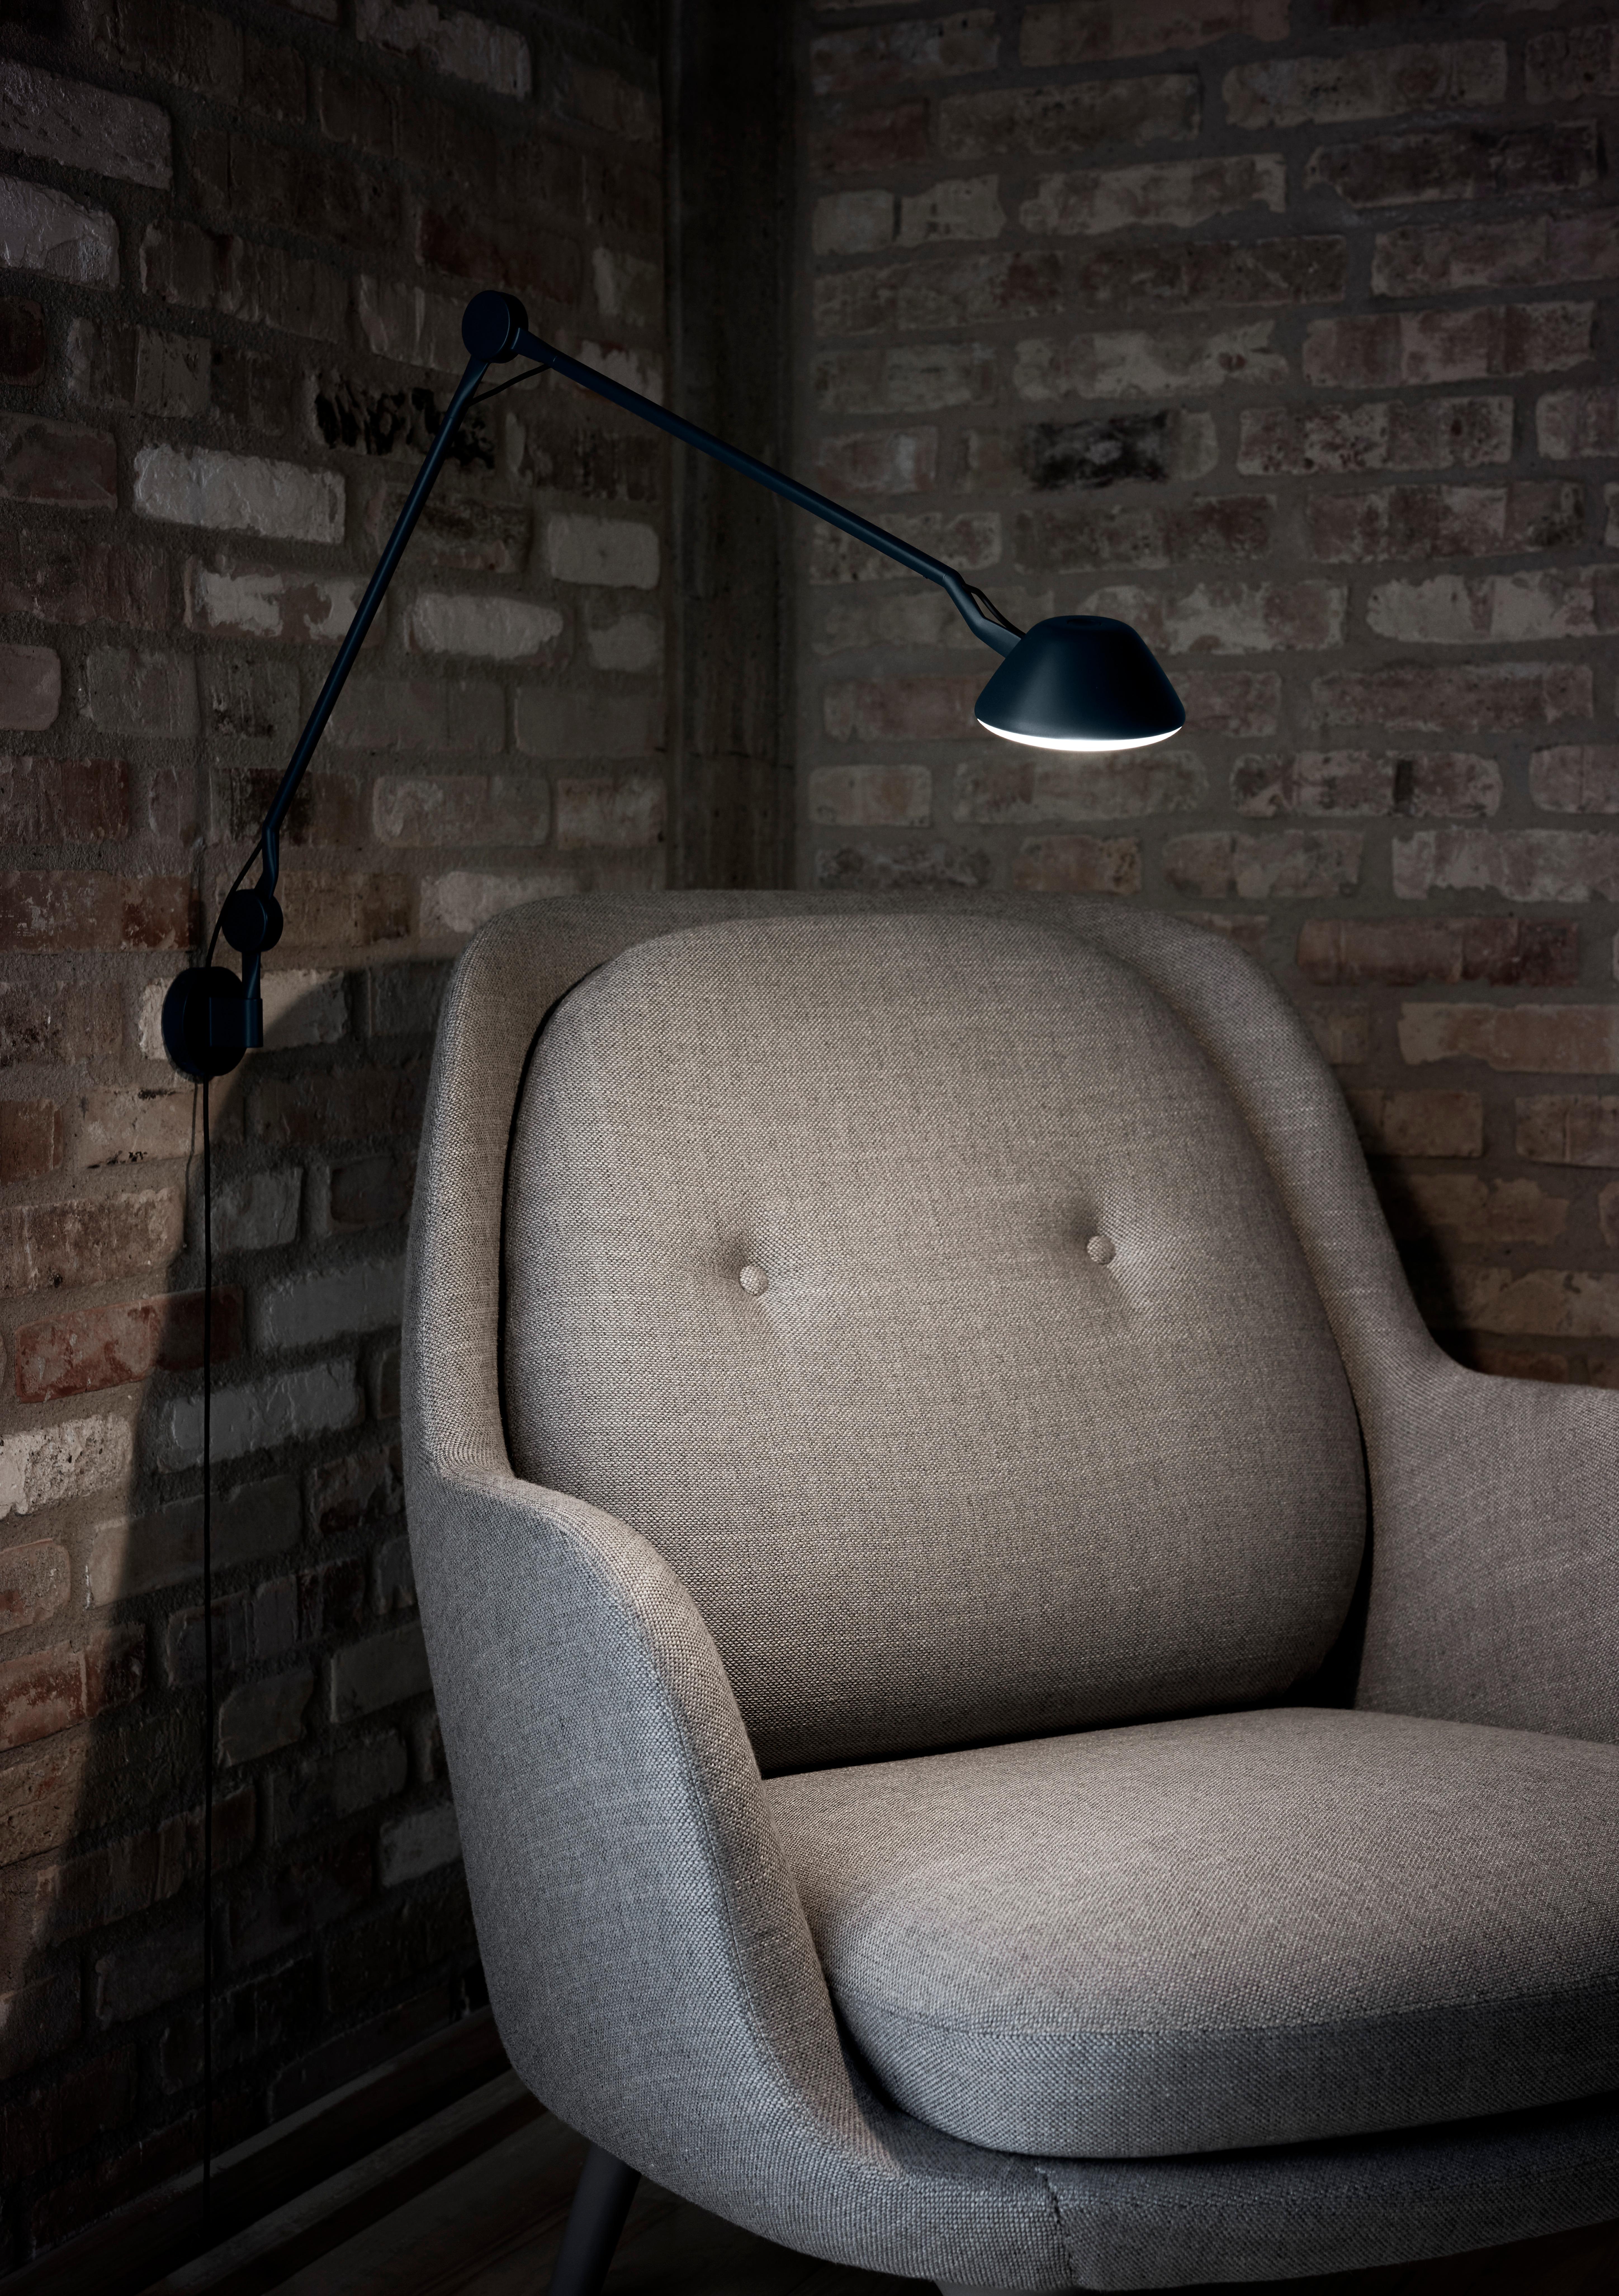 Anne Qvist 'AQ01' Wall Lamp in blue for Fritz Hansen.

Established in 1872, Fritz Hansen has become synonymous with legendary Danish design. Combining timeless craftsmanship with an emphasis on sustainability, the brand’s re-editions of iconic